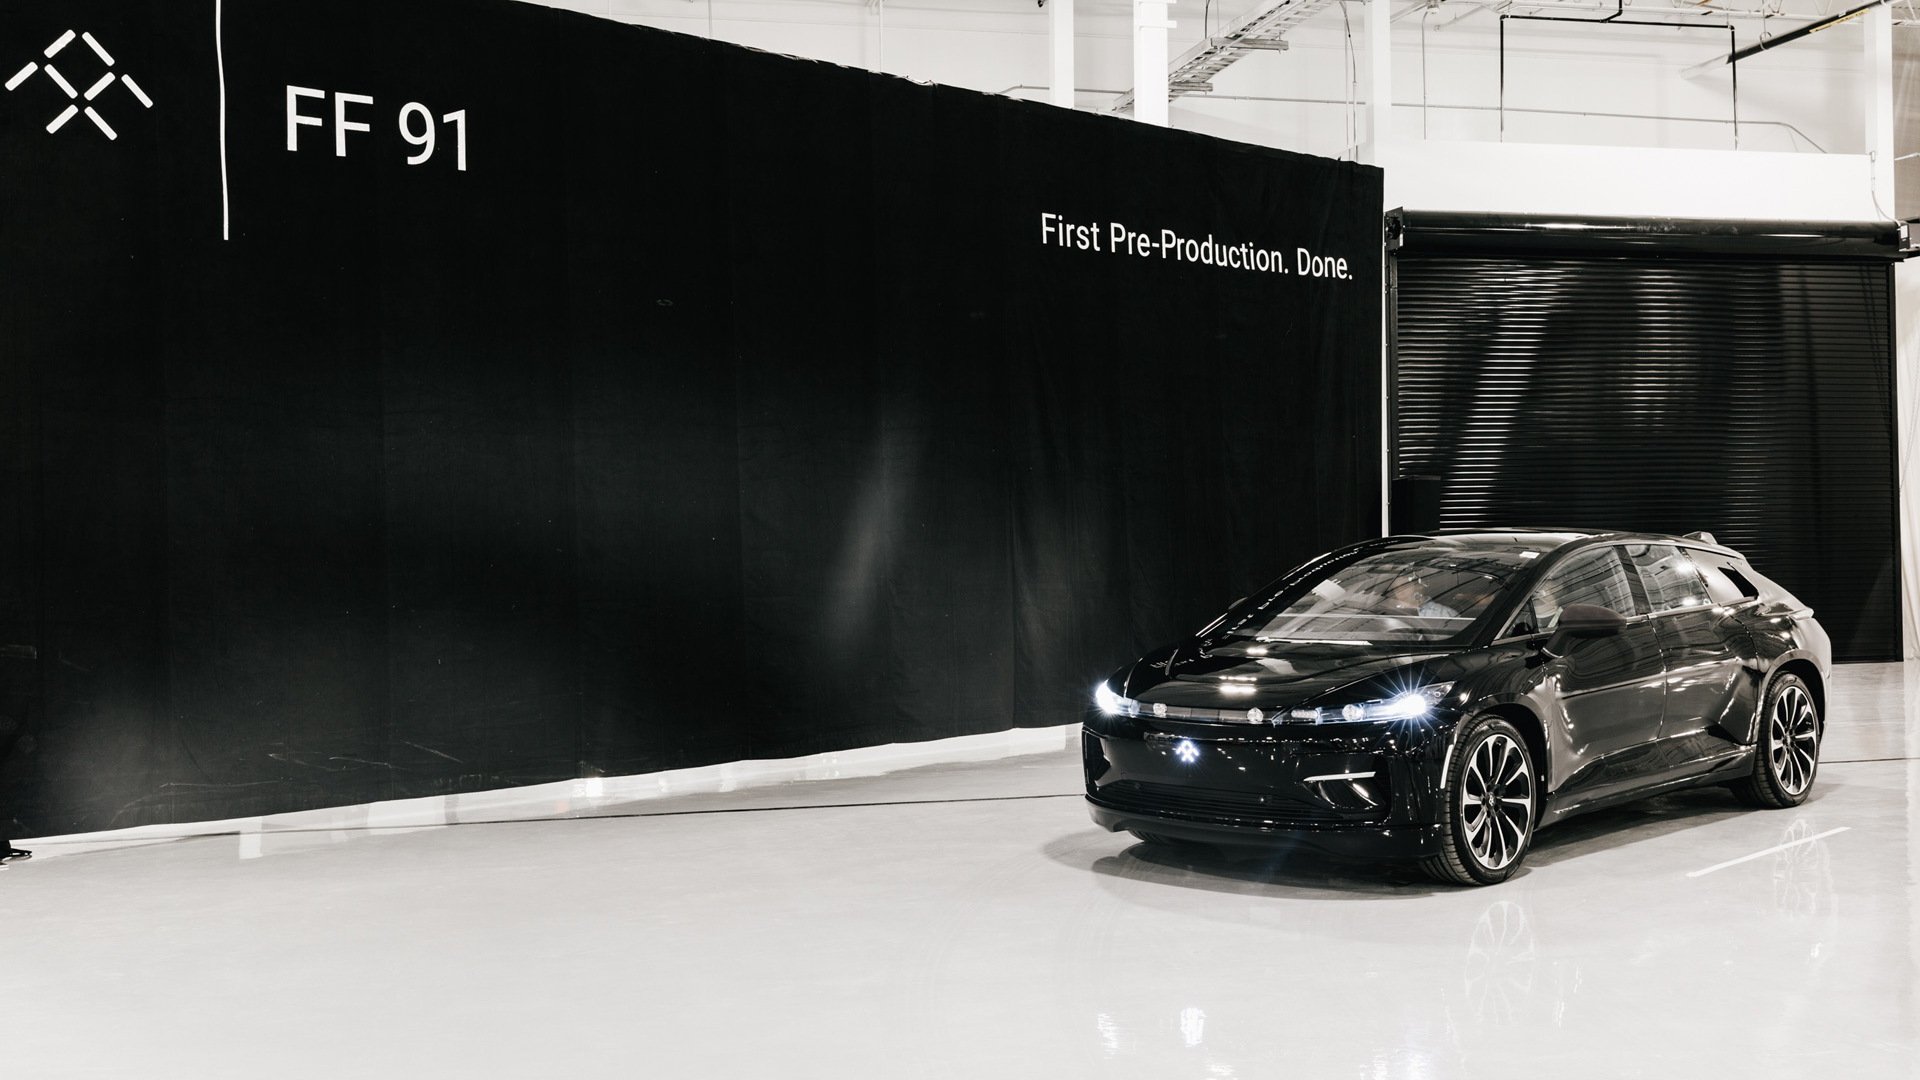 Faraday Future completes first pre-production FF91 on August 28, 2018